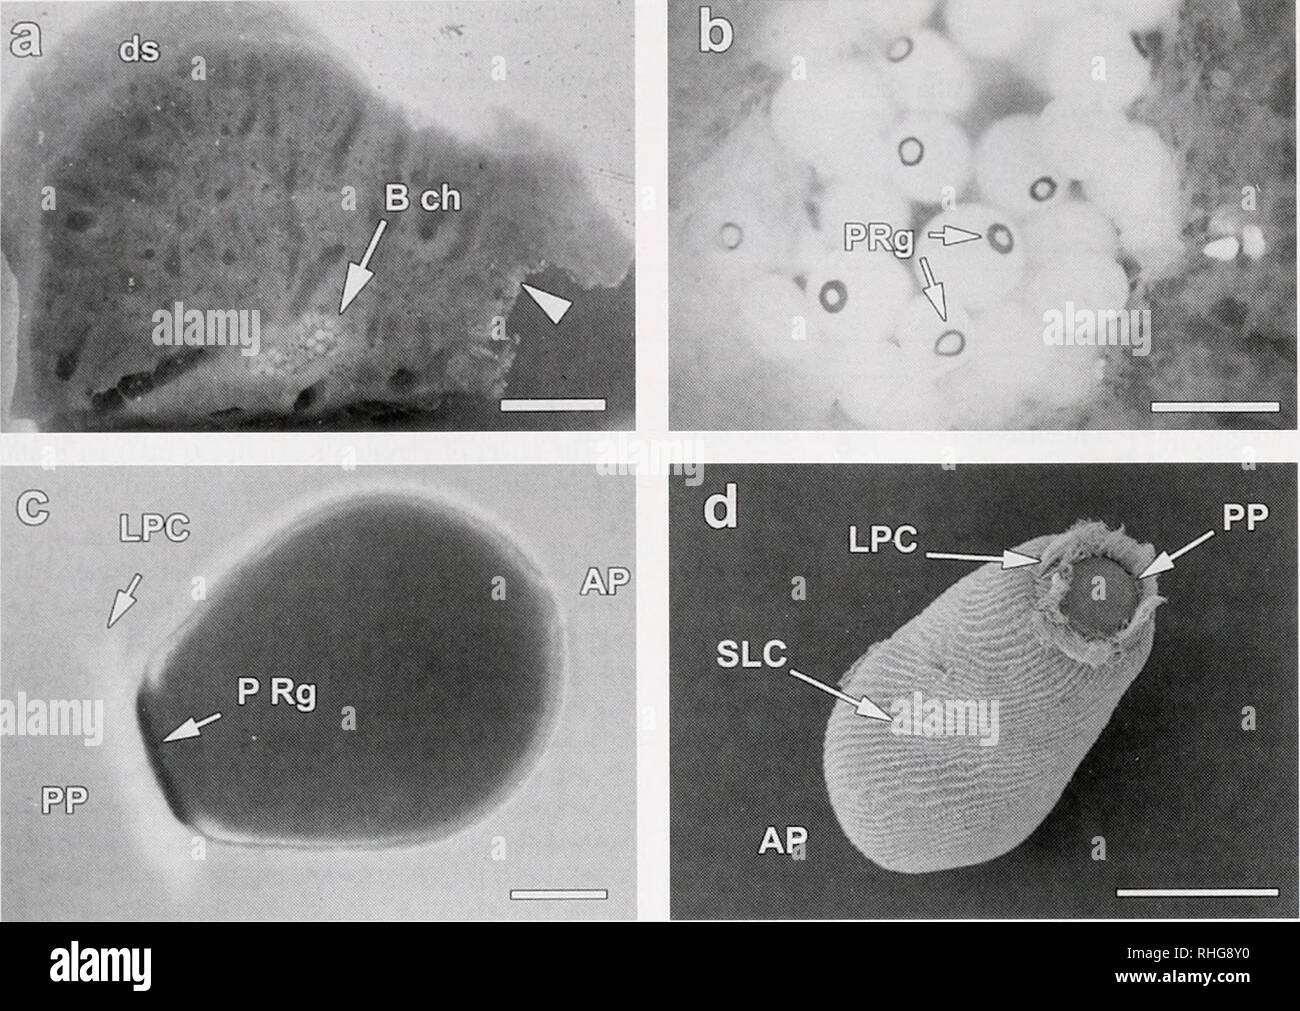 . The Biological bulletin. Biology; Zoology; Biology; Marine Biology. PHOTOKINES1S IN SPONGE LARVAE 325. Figure 1. Brood chambers and embryos of Reneira sp. in various stages of development (a-c: light microscopy; d: scanning electron microscopy), (a) A section of the adult sponge that was attached at its lower edge to the coral substrate (arrowhead) shows a brood chamber (B ch) with embryos and larvae. Bar: 1 cm. Dermal surface, ds. (b) Embryos and larvae in a brood chamber clearly showing the pigment ring (PRg) at one pole. Bar: I mm. (c) A swimming larva showing the dark pigmented ring (PRg Stock Photo